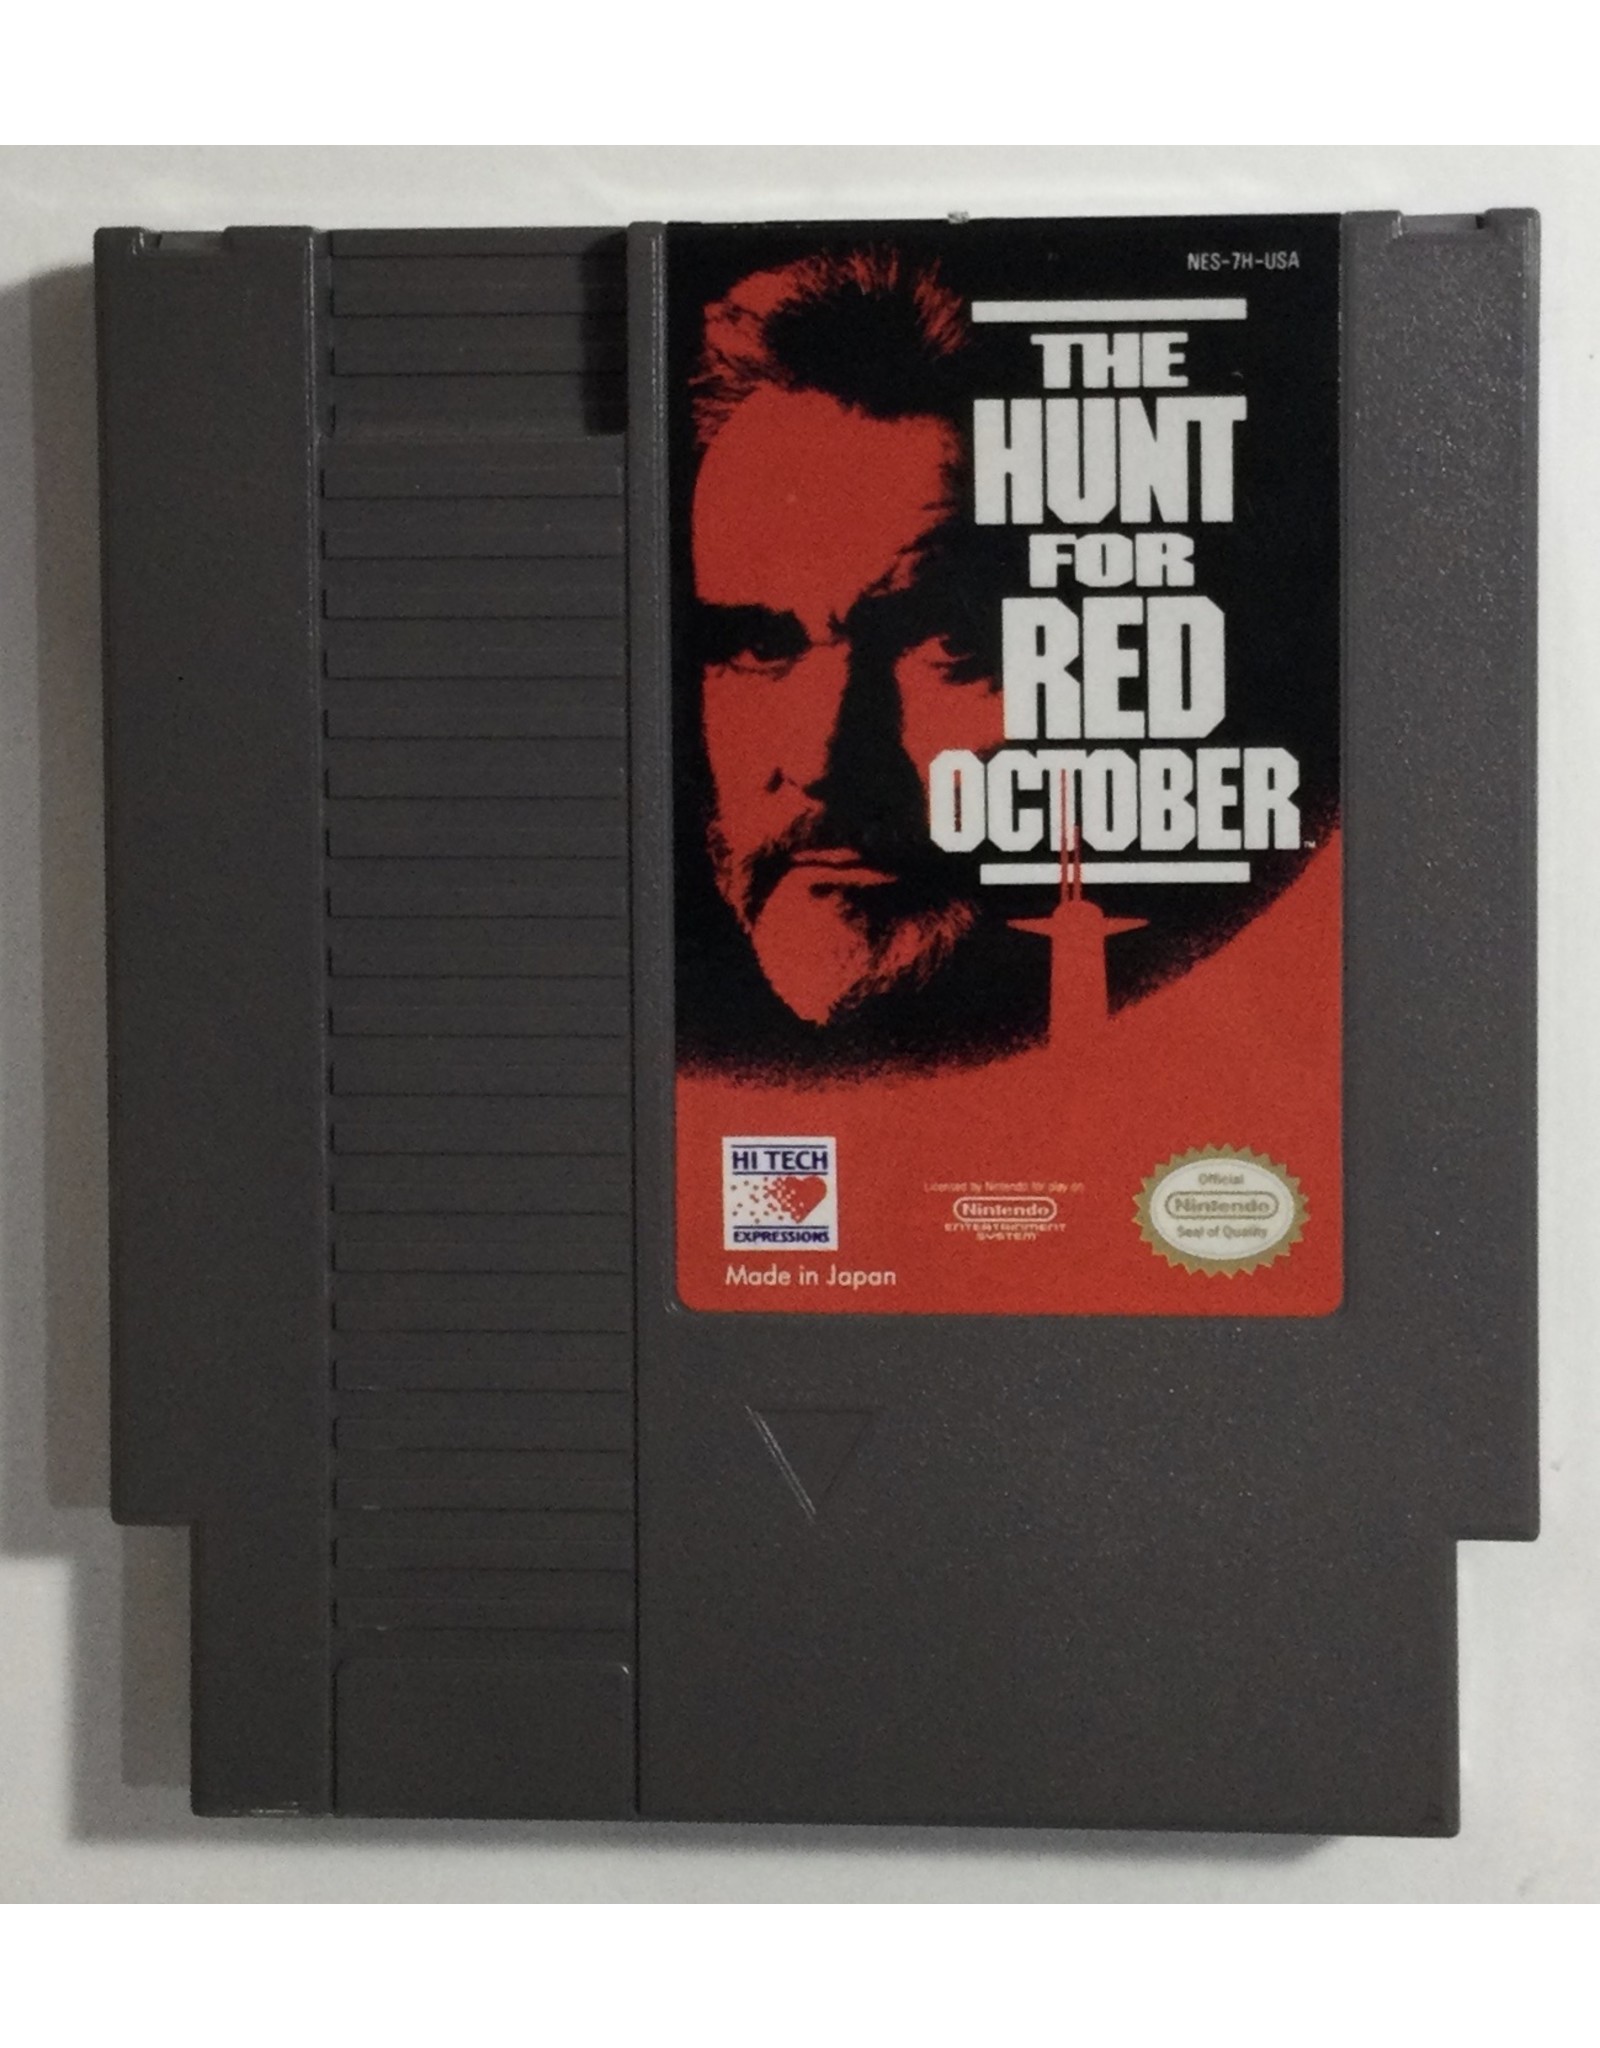 HI TECH EXPRESSIONS The Hunt for Red October for Nintendo Entertainment system (NES) - CIB